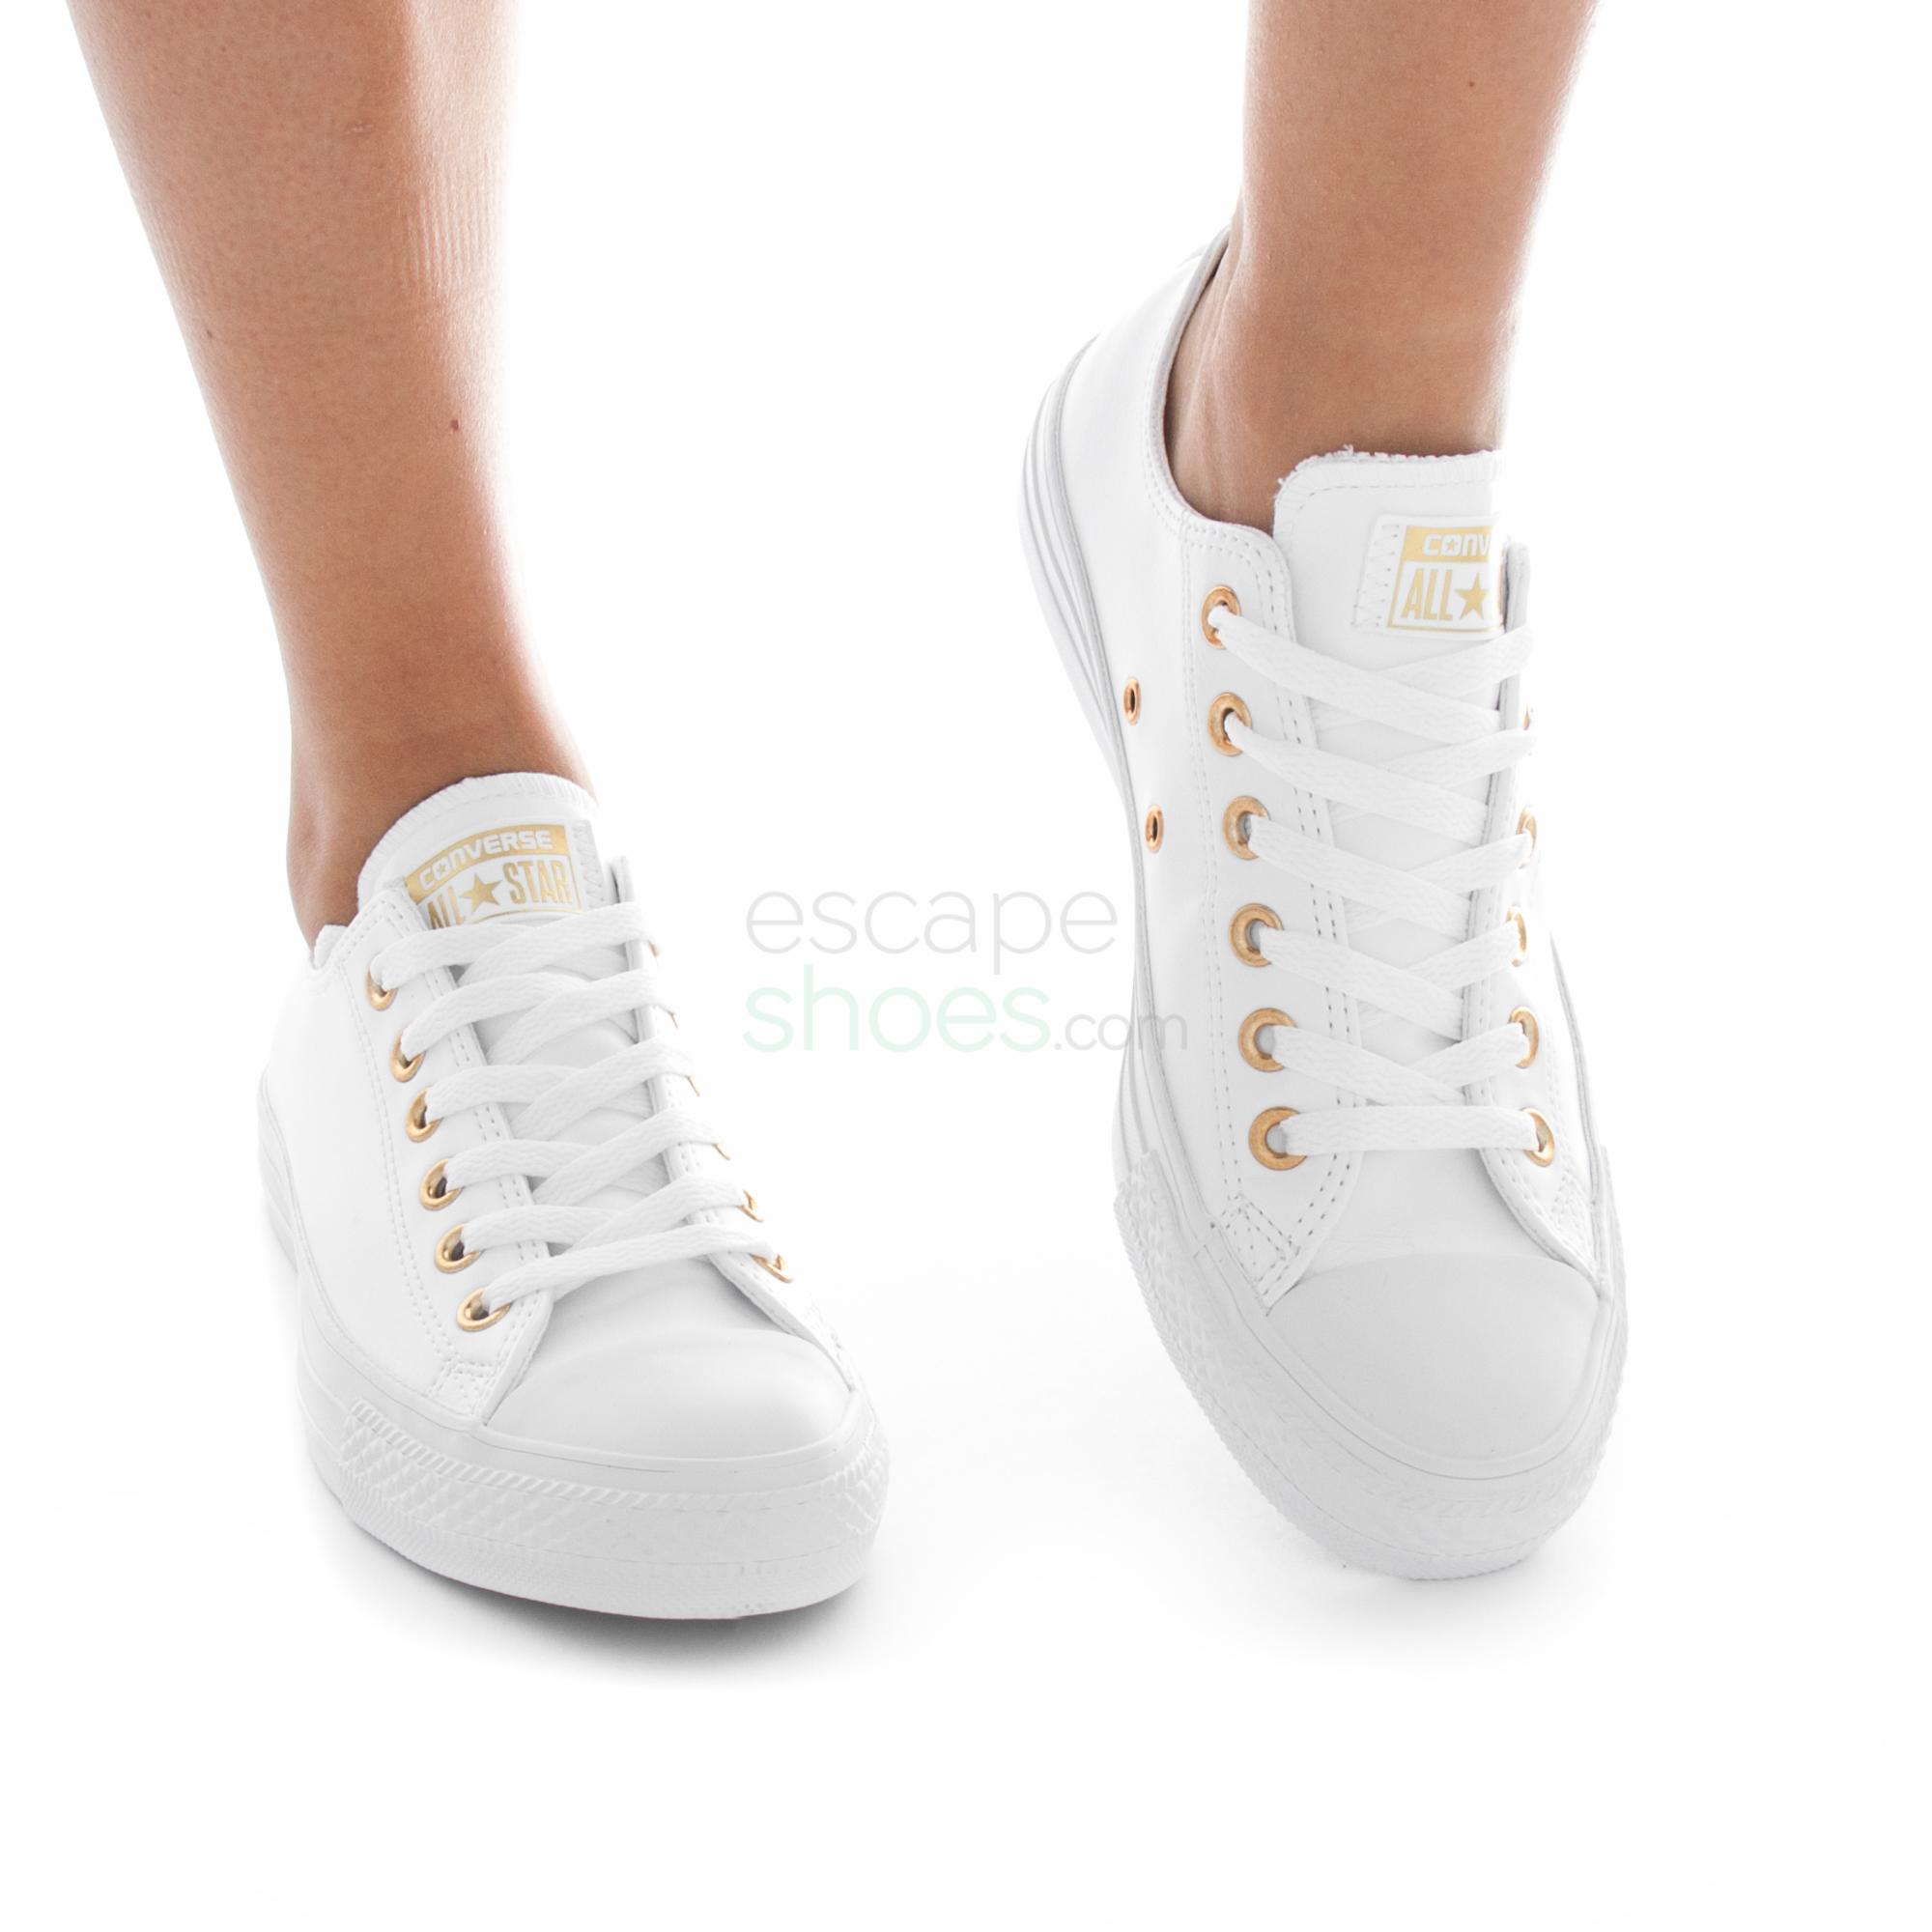 women's white and gold converse